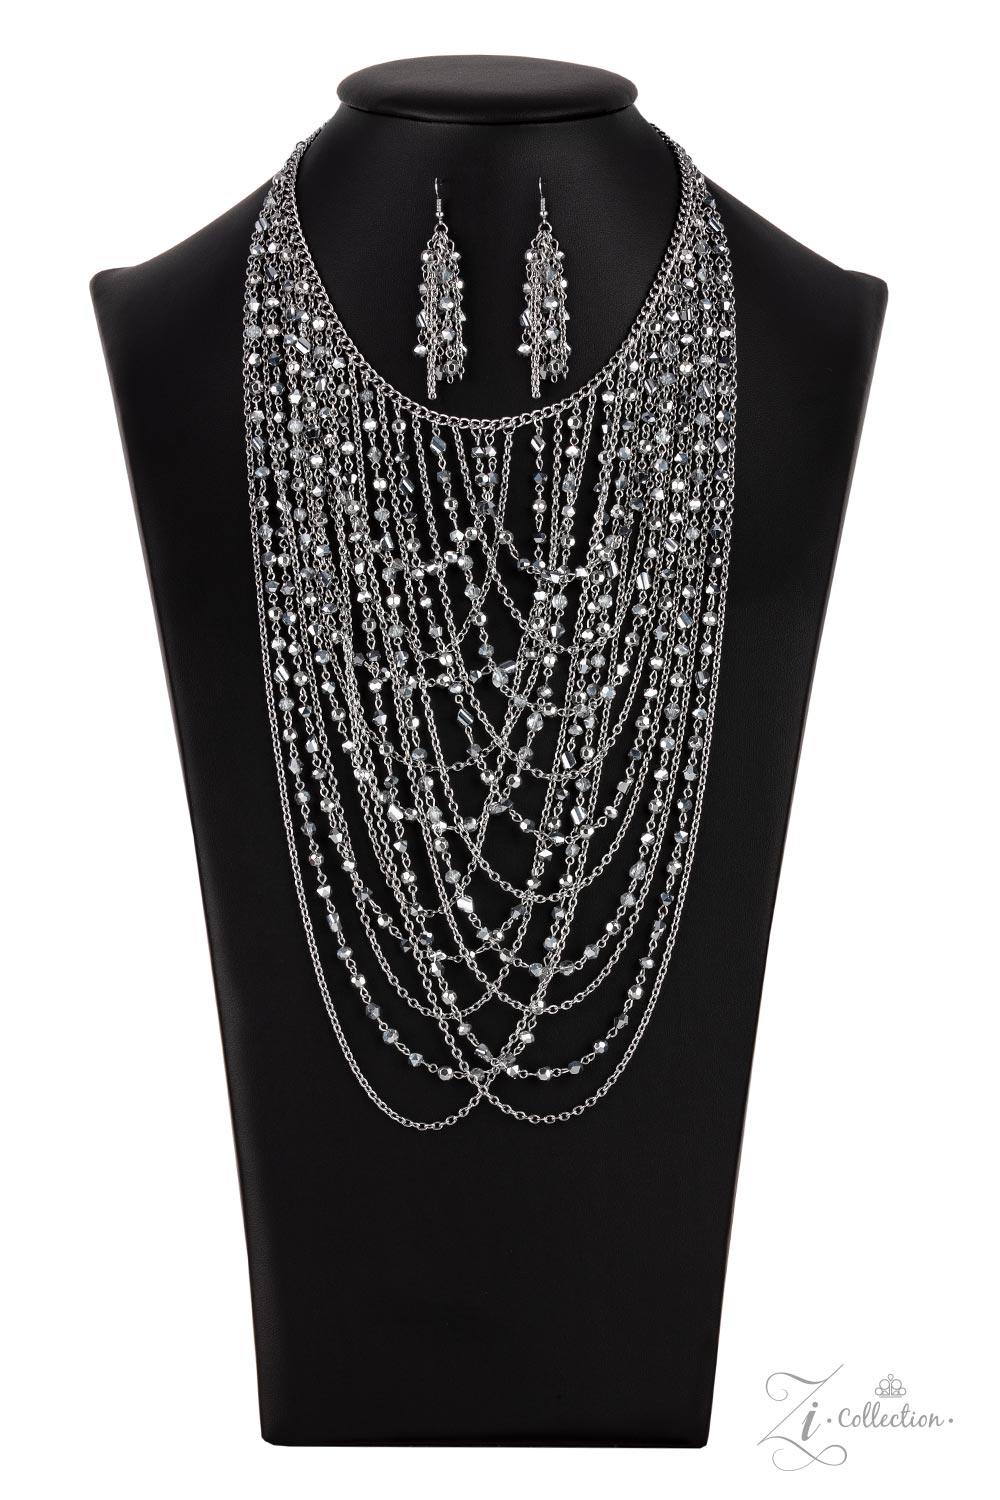 Paparazzi Accessories Enticing An entrancing collection of raw cut, faceted, and crystal-like silver and hematite beads delicately connect into glitzy strands that dauntlessly drape across the chest. Intermixed with plain silver chains, the swooping layer